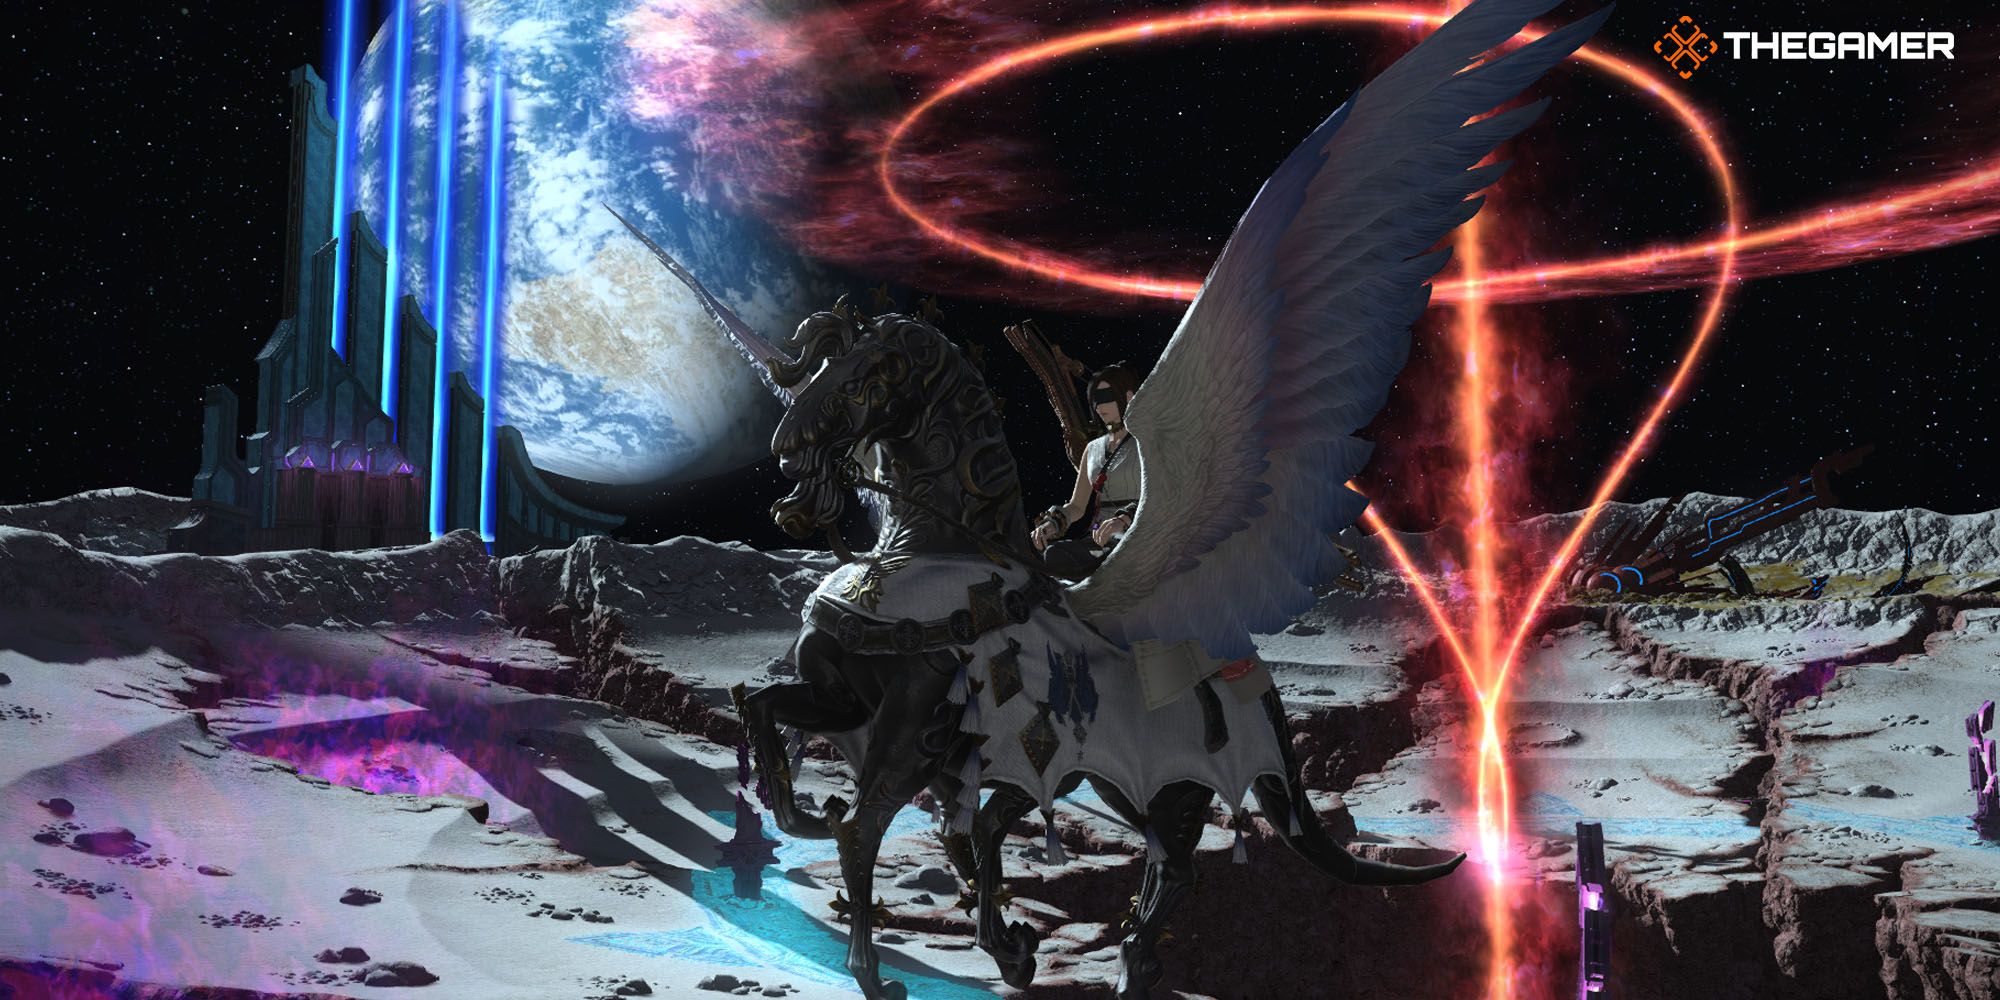 A player character on a flying mount on the moon in Final Fantasy 14.